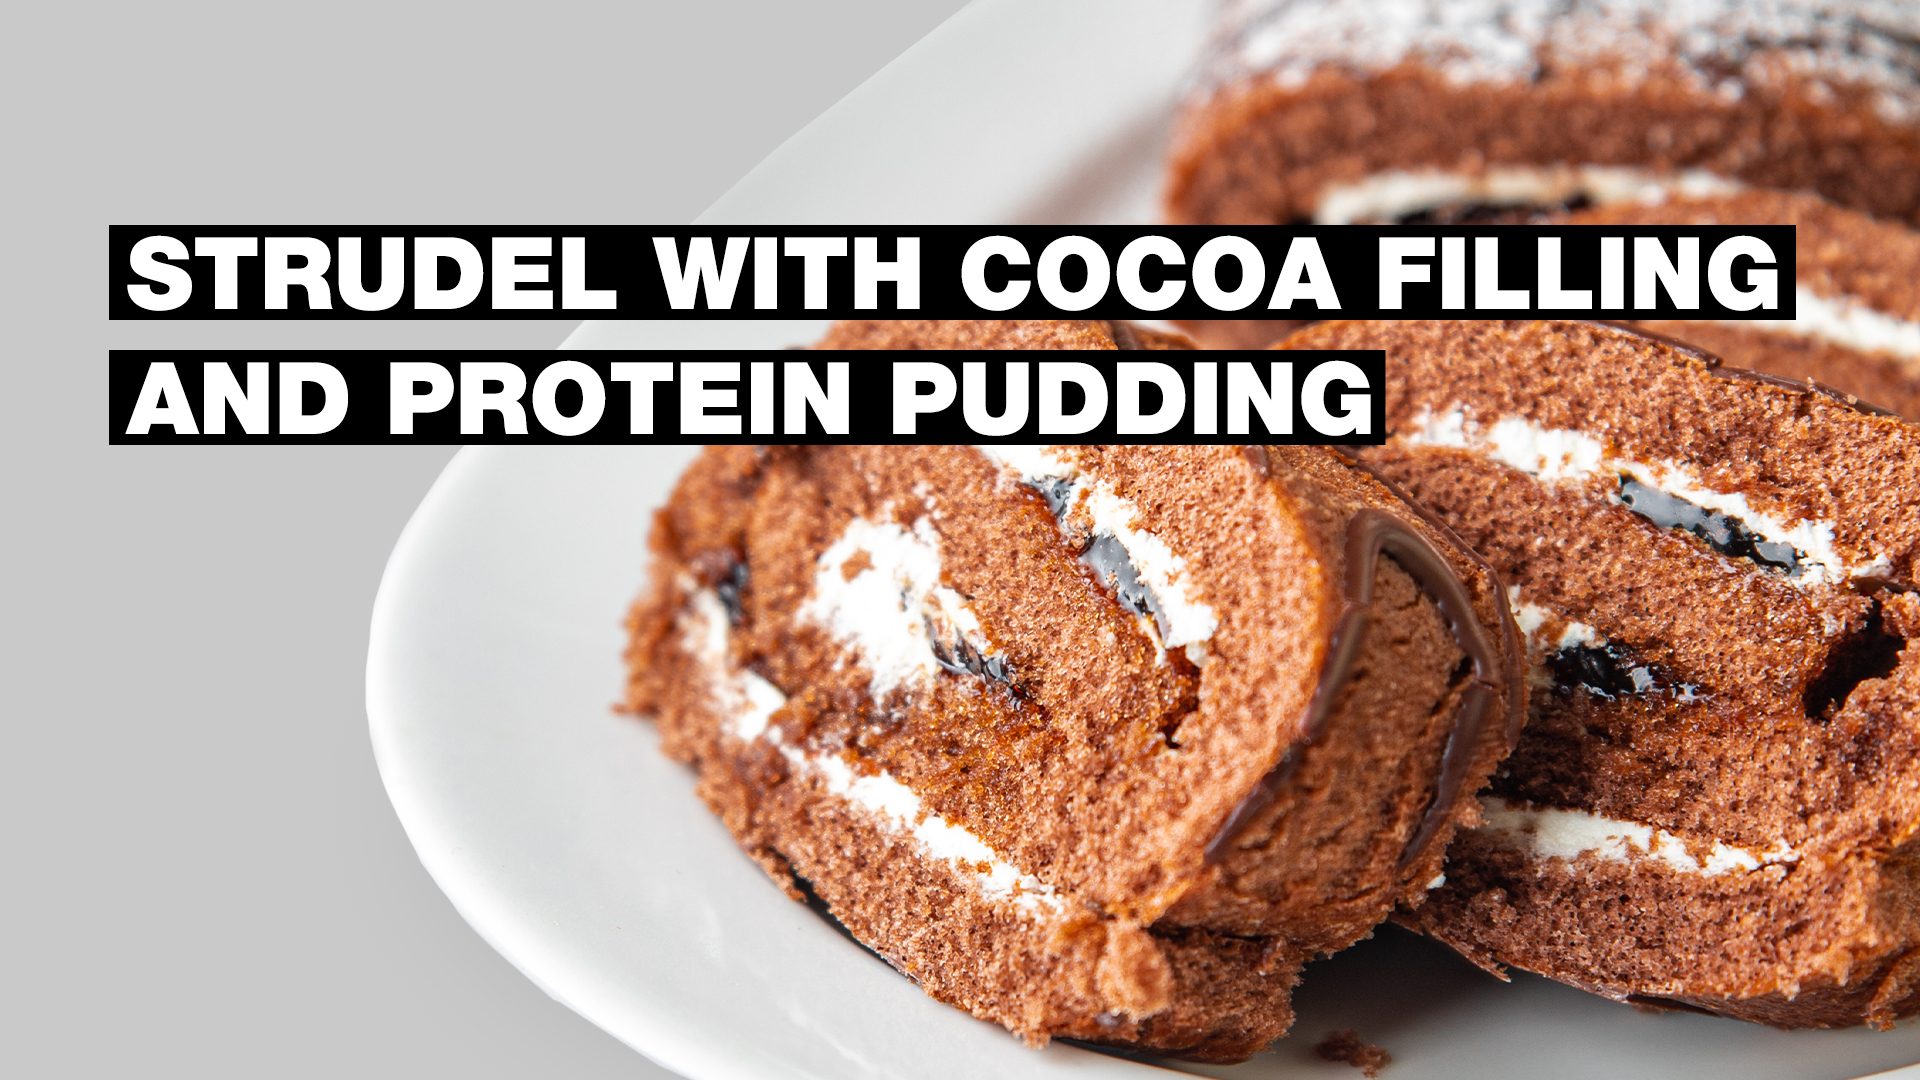 Strudel with cocoa filling and protein pudding